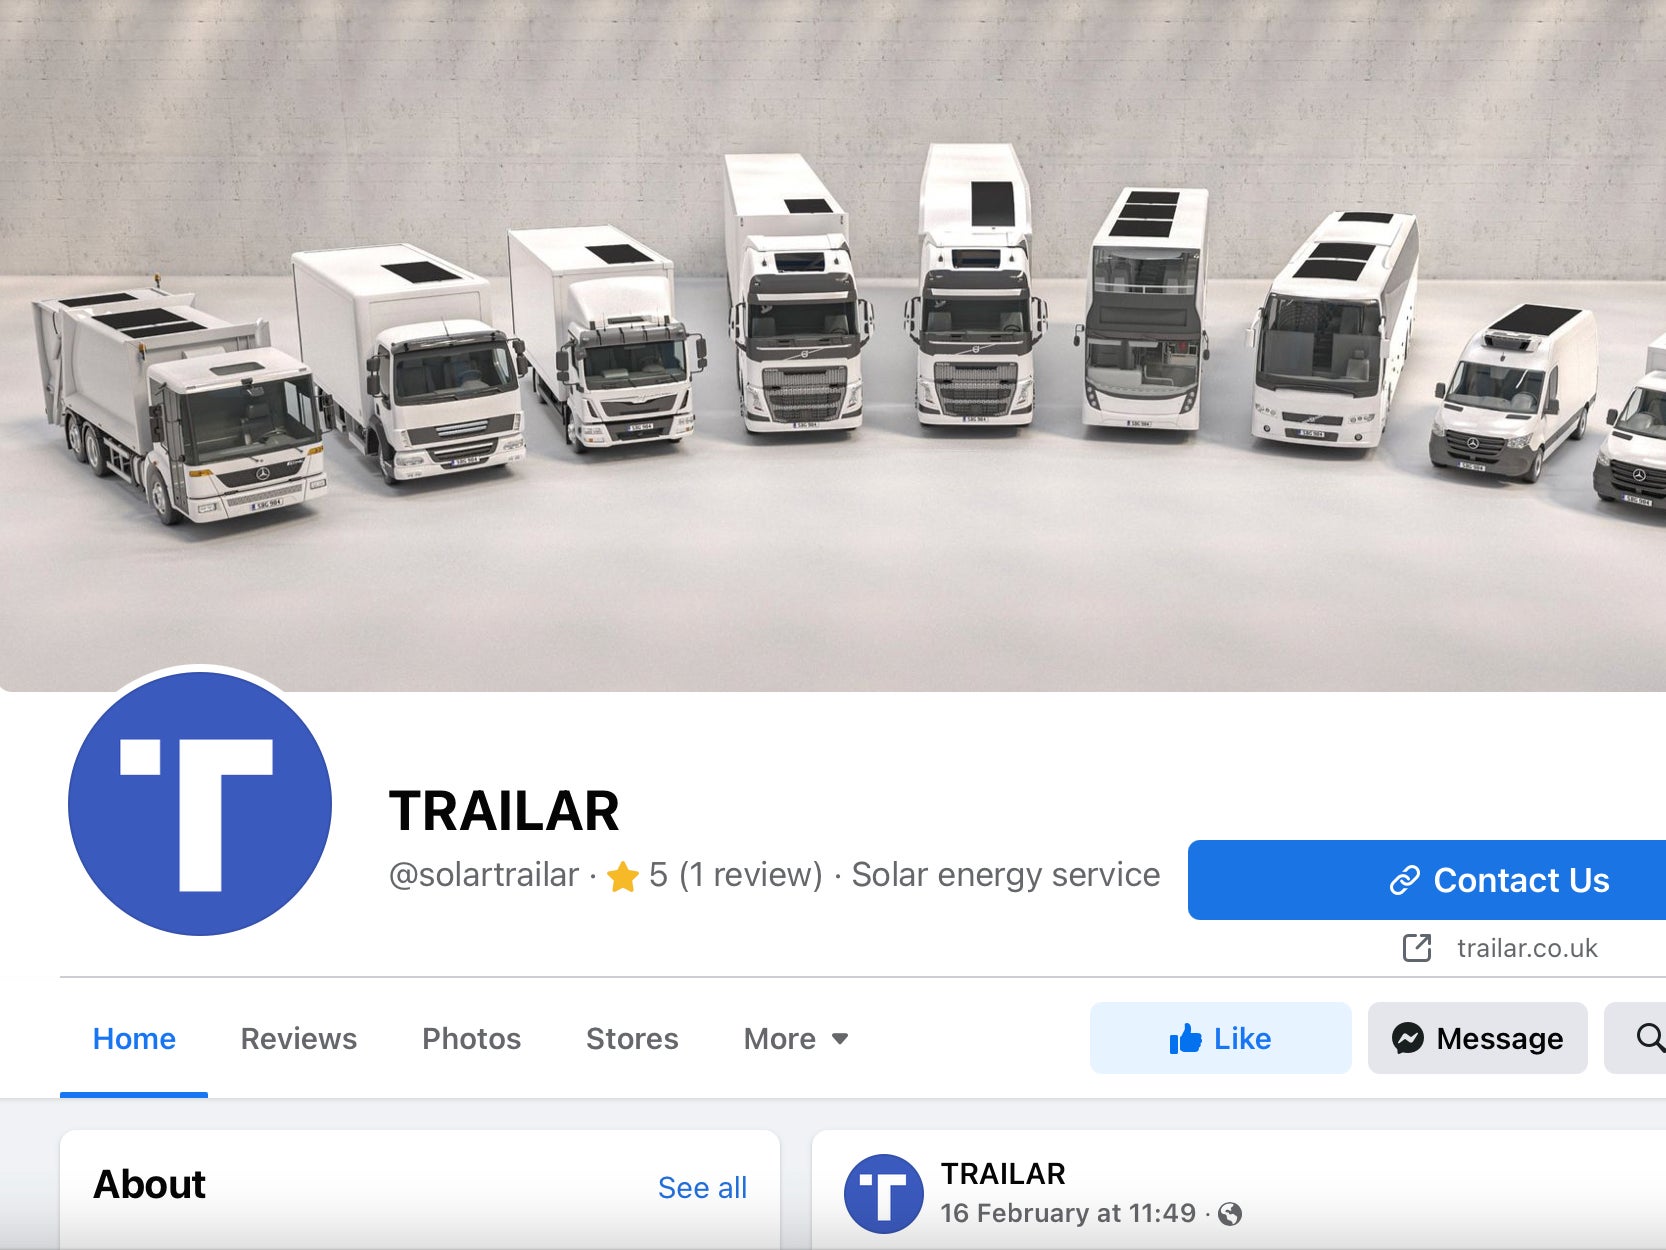 The Facebook page for the British start-up, Trailar